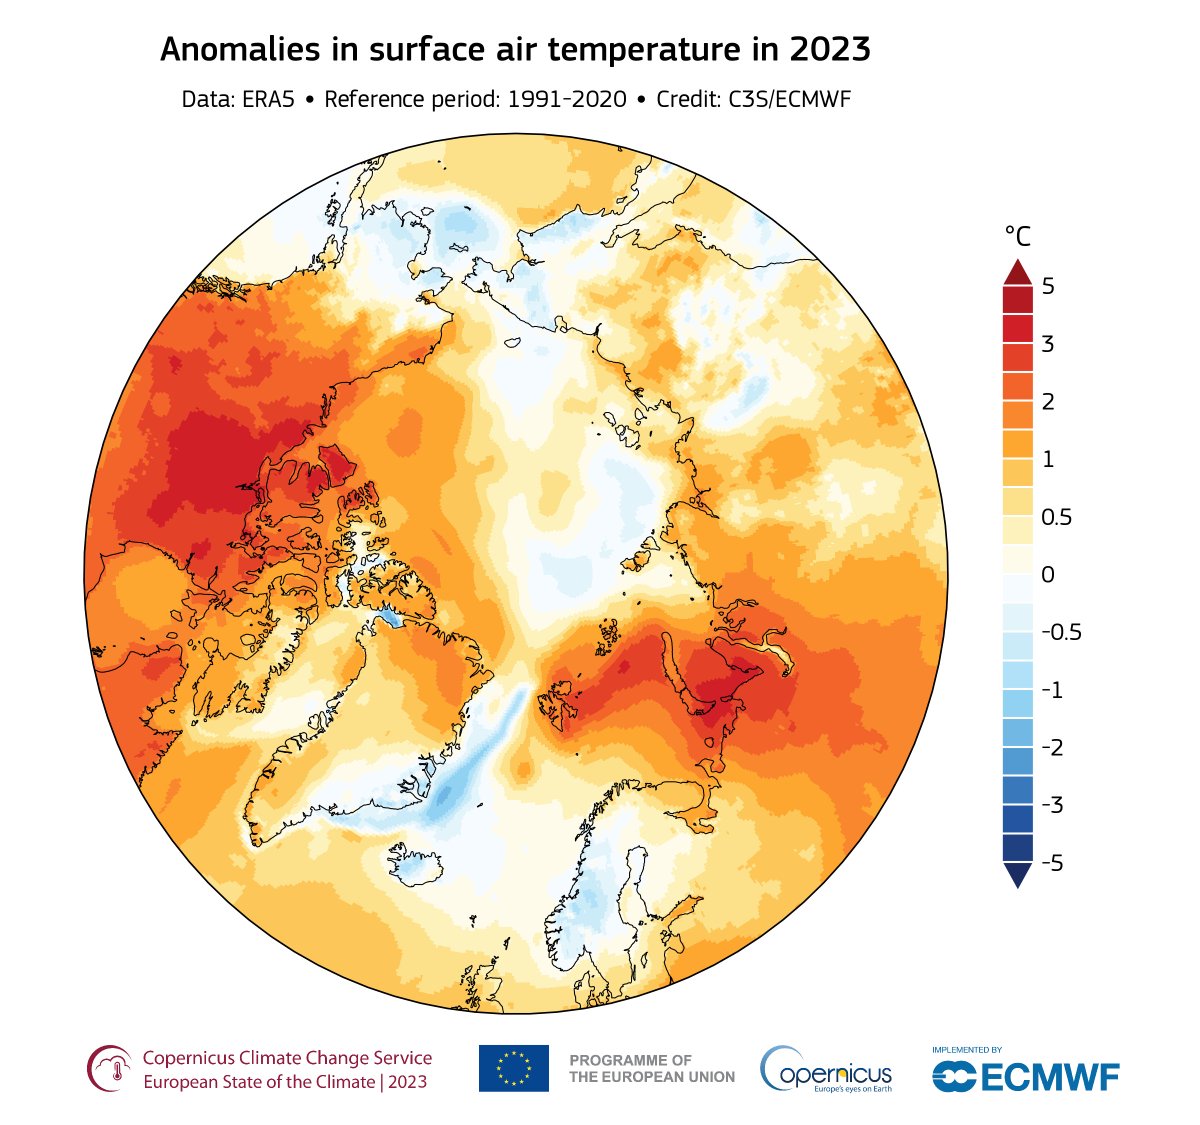 New data from @CopernicusECMWF & @WMO show that #Arctic sea ice extent: 🌡️ Was below average for most of 2023 🌡️ Annual max. was 4% below average, ranking 5th lowest 🌡️ Annual min. 18% below average, ranking 6th lowest This #EarthDay, we need #ClimateAction🚨 #ESOTC #ESOTC2023